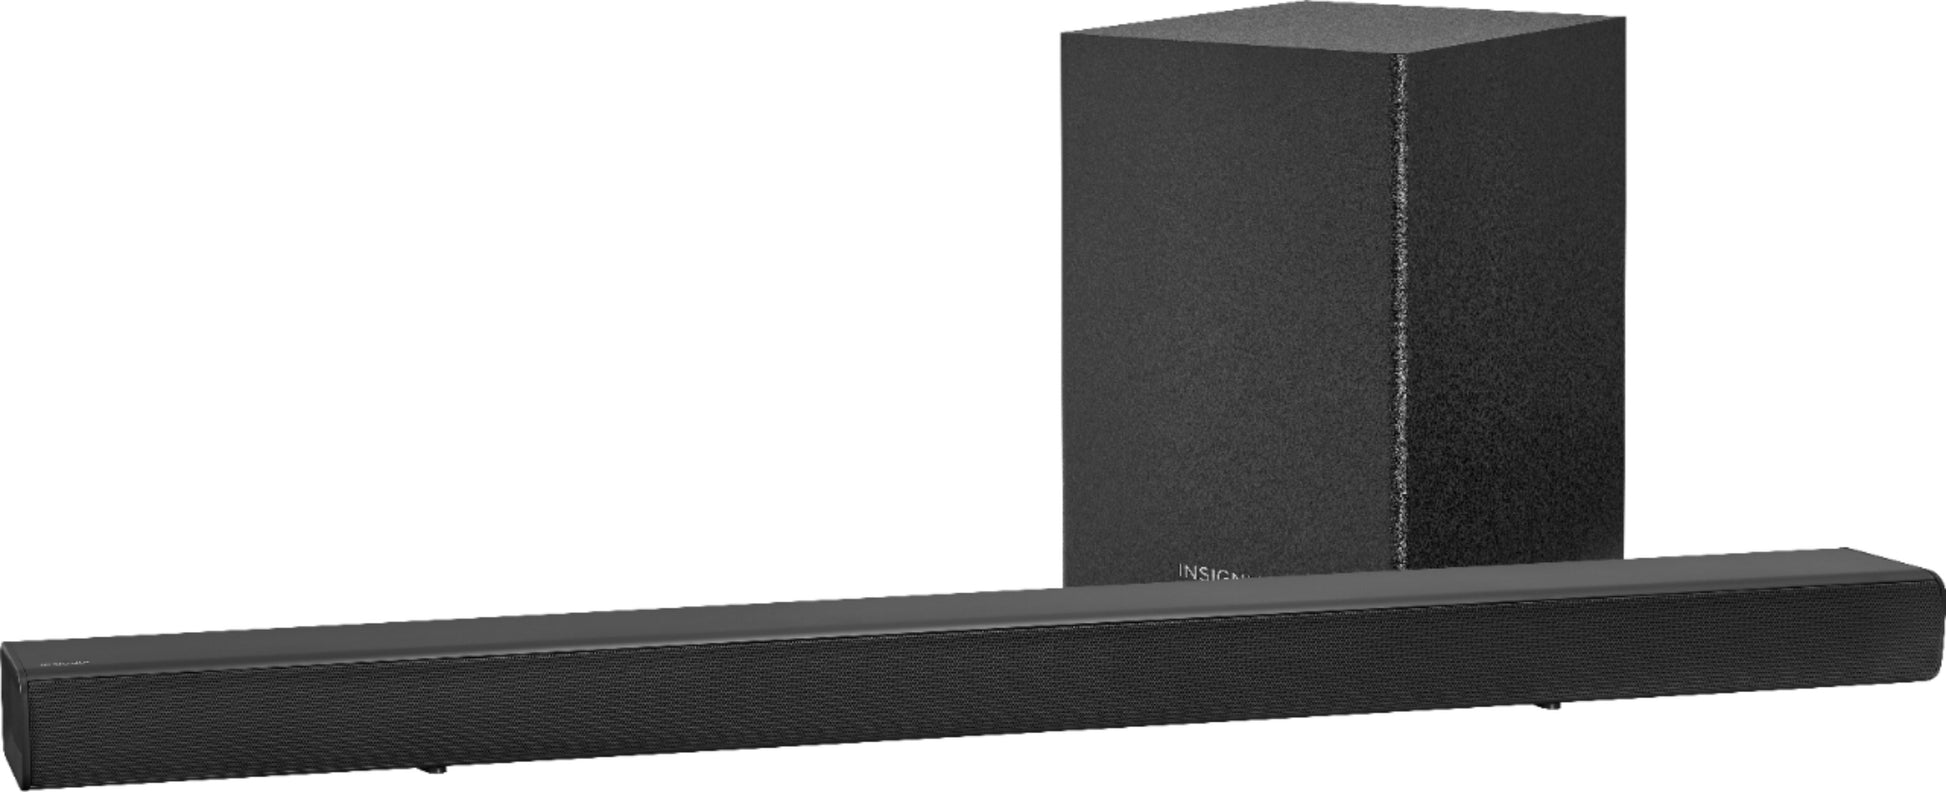 INSIGNIA Electronic Accessories INSIGNIA - 2.1-Channel 80W Soundbar System & Subwoofer- 240V